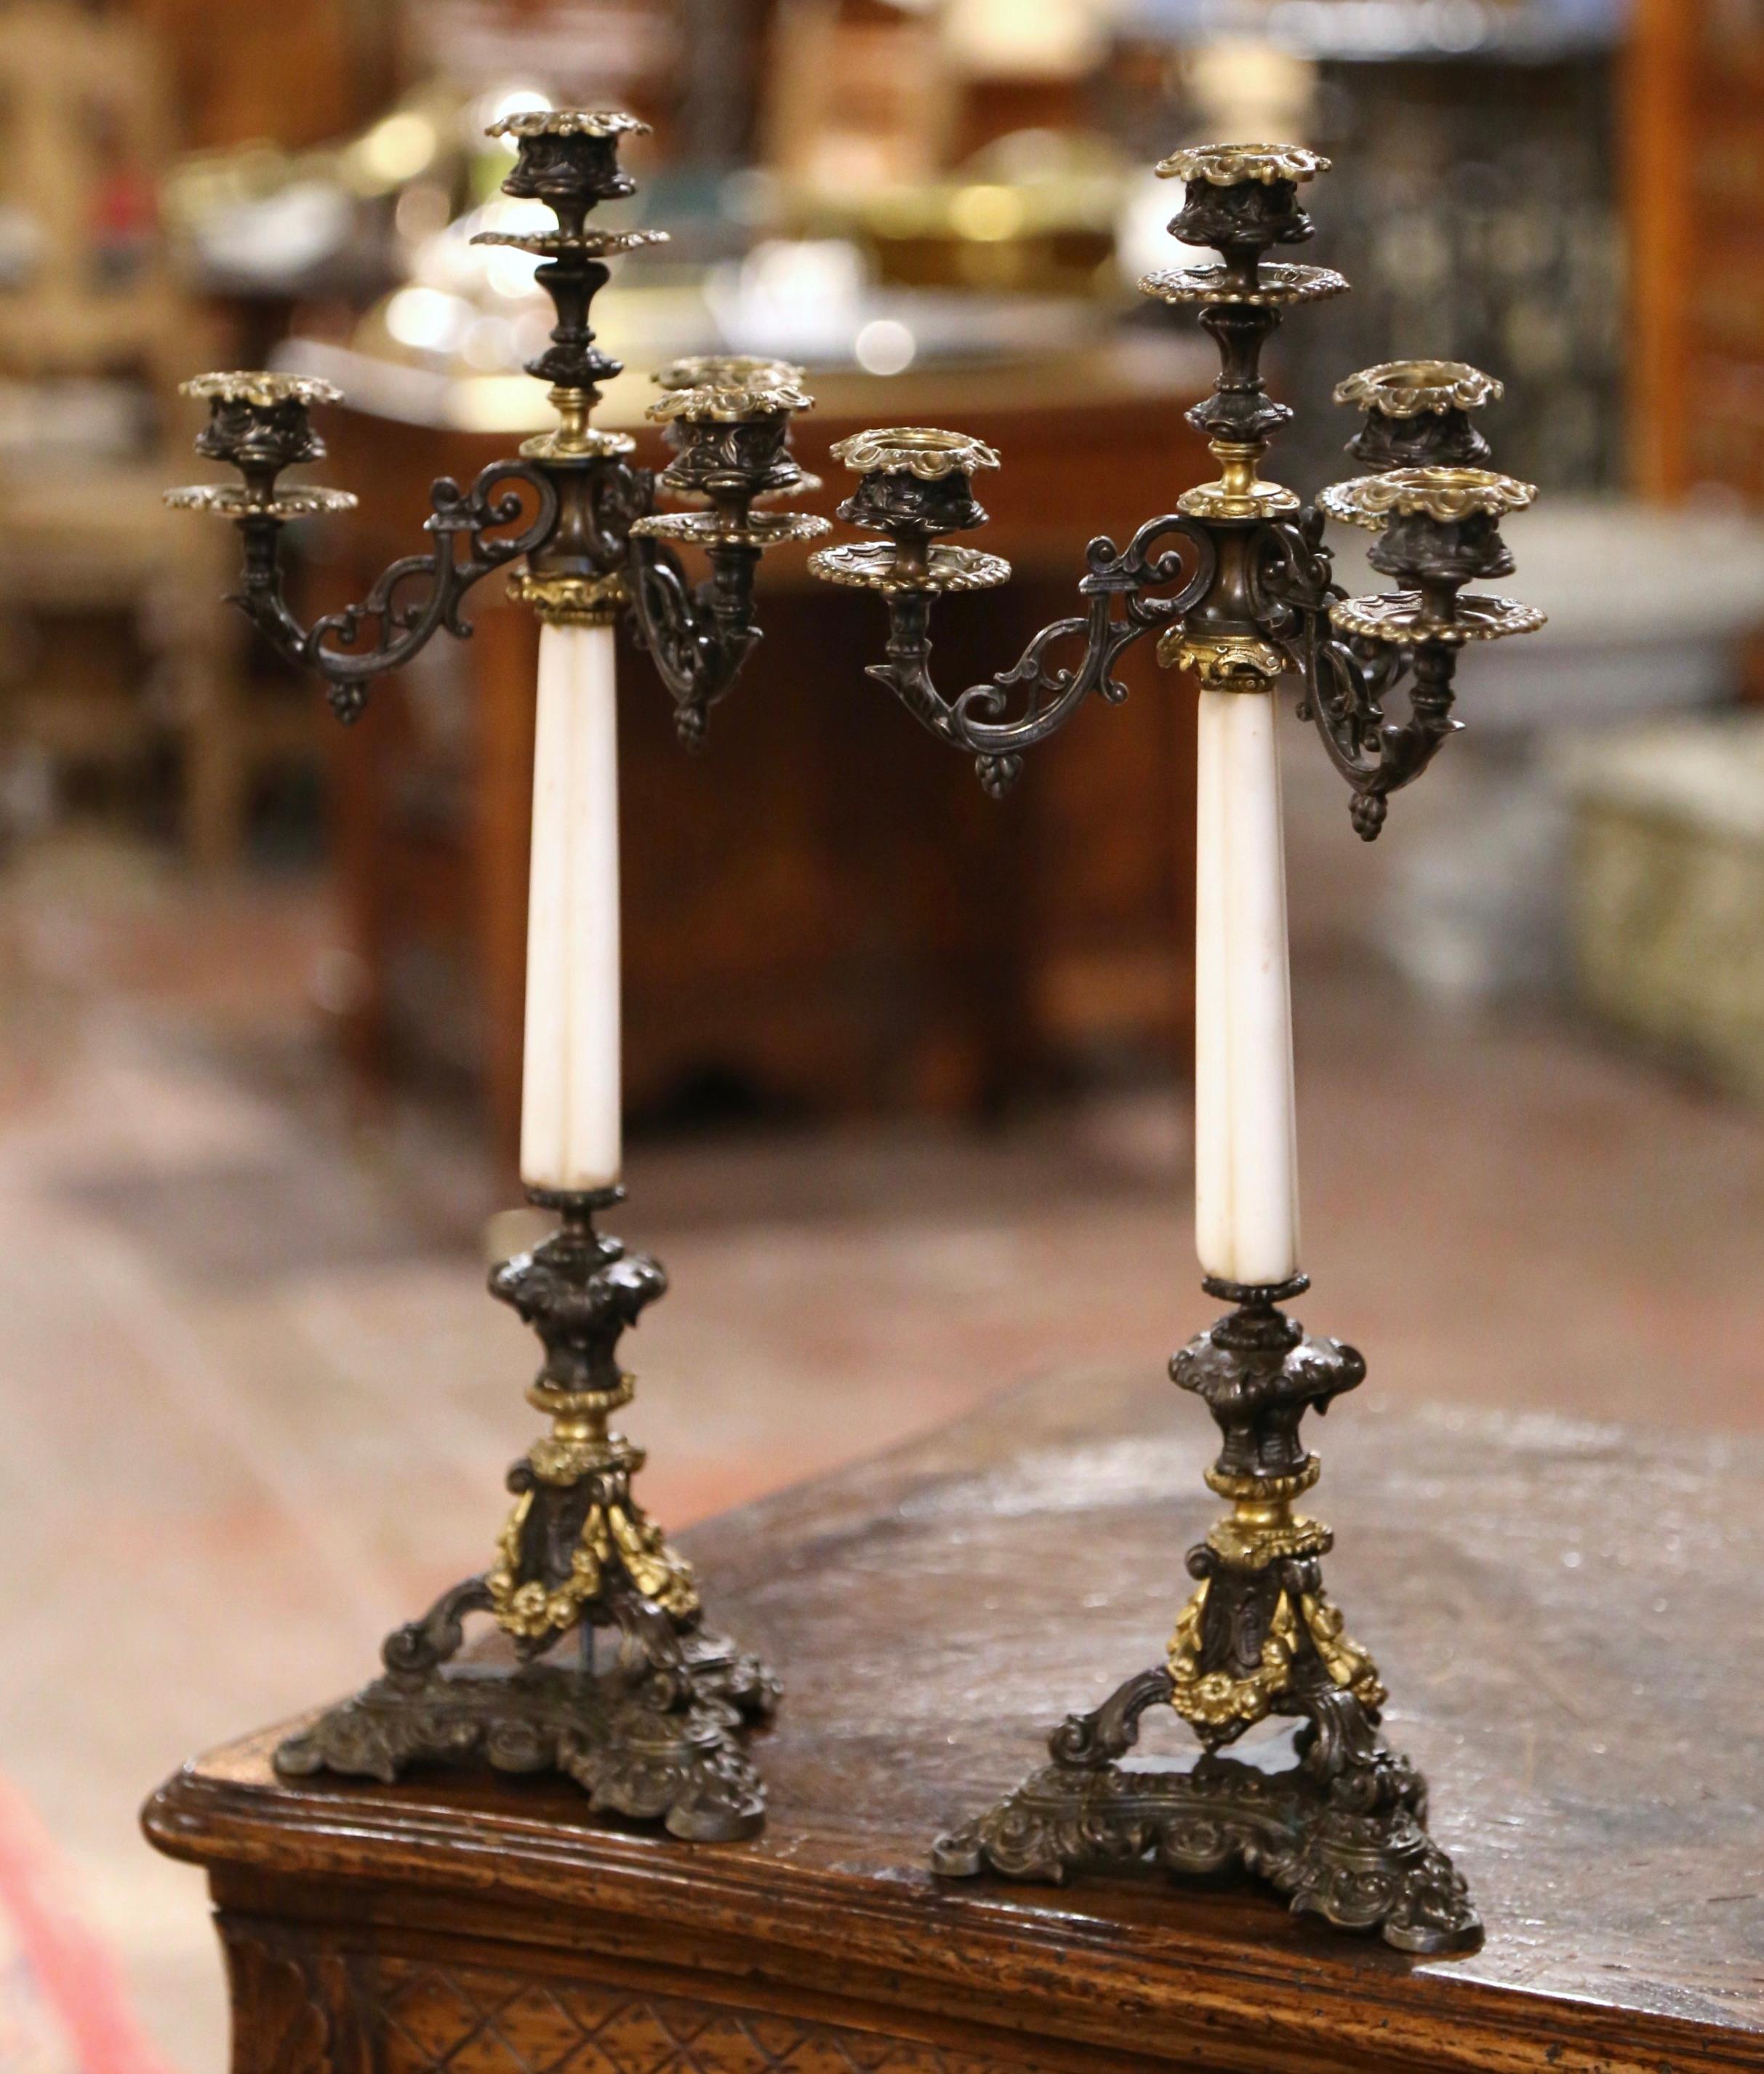 Decorate a console or a mantel with this elegant pair of antique candlesticks. Crafted in France circa 1870, each candelabra stands on three scrolled feet over an integral tripod base. The intricate base is decorated with fruit swag decorations over